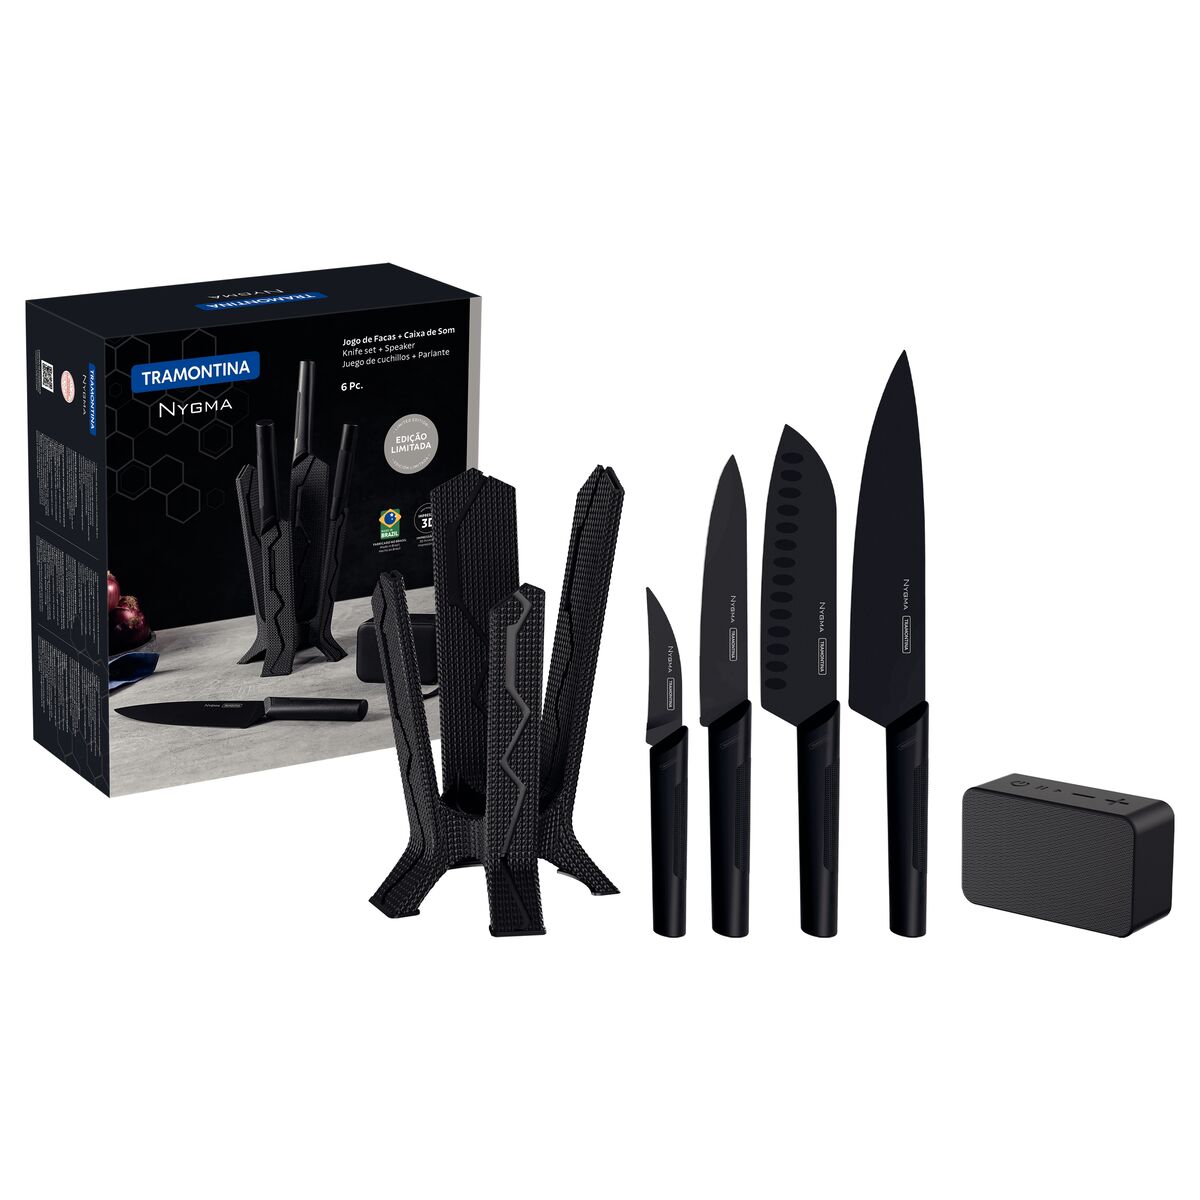 Tramontina Nygma 6-Piece Knife Set with Stainless-Steel Blades and Black Polypropylene Handles with Support and Speaker